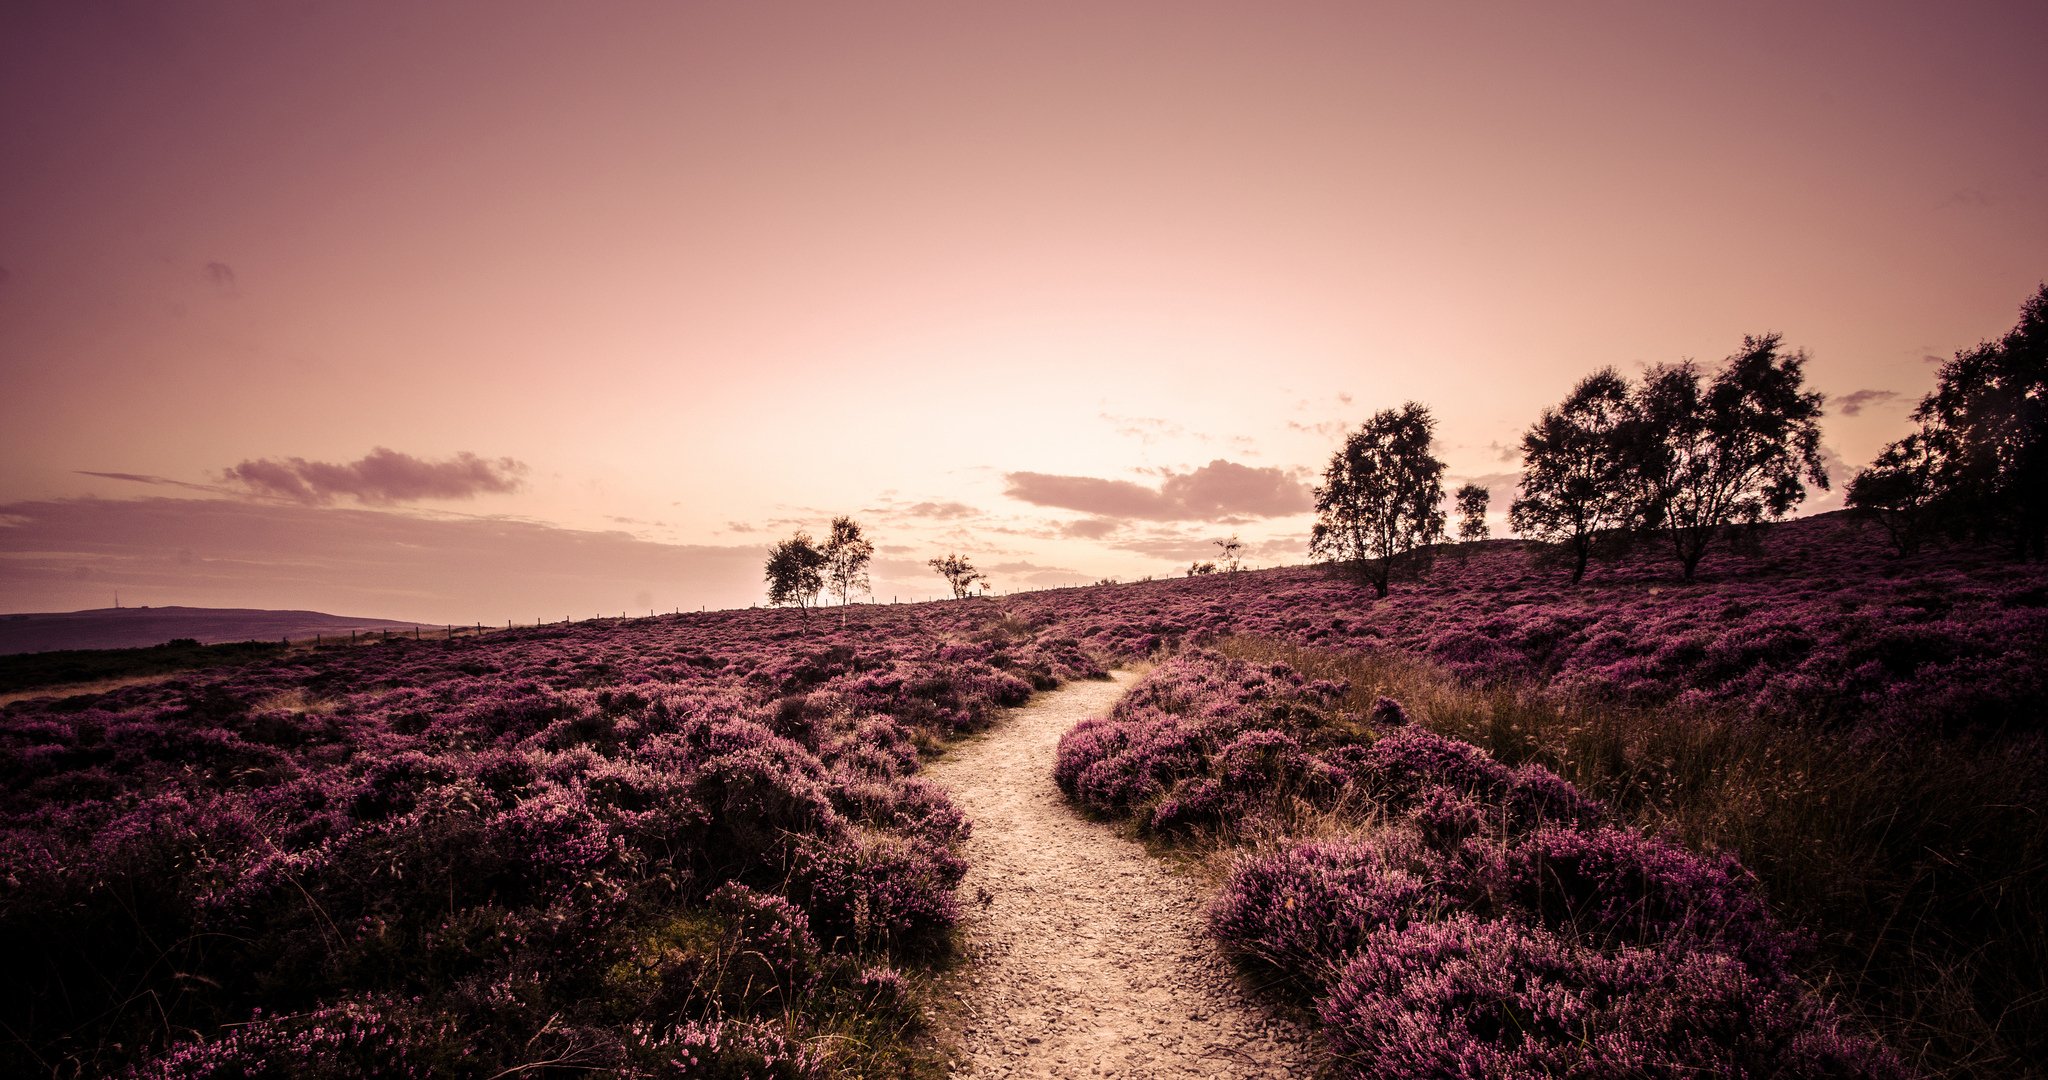 england, Field, Heather, Plants, Trees, Road, Footpath, Nature, Landscape, Evening, Path, Trail Wallpaper